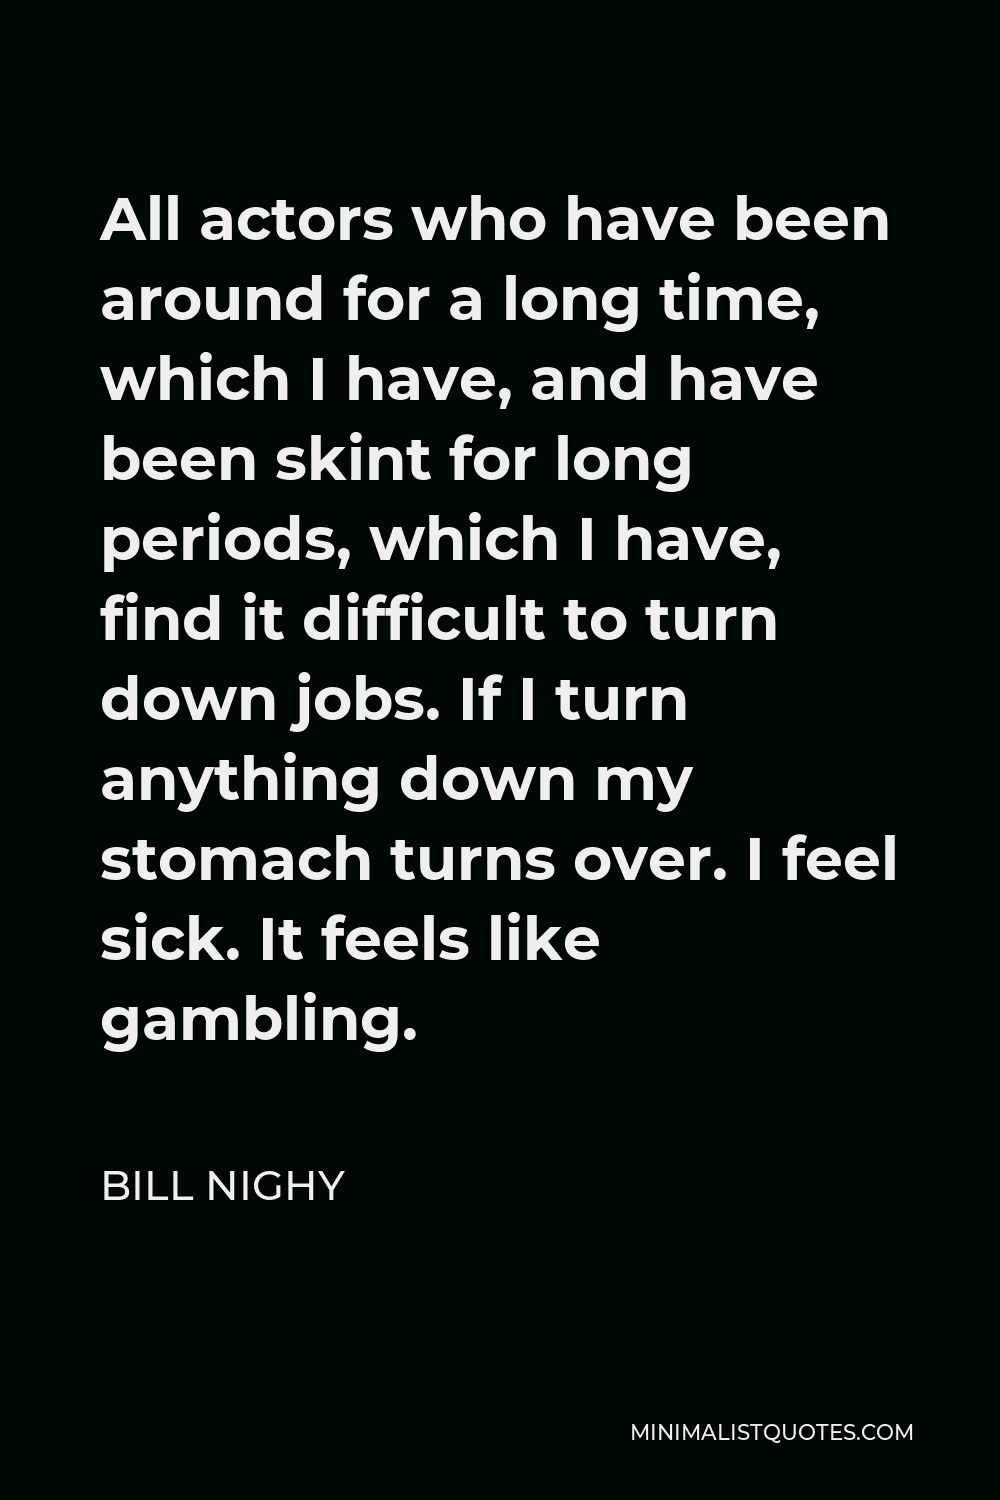 Bill Nighy Quote - All actors who have been around for a long time, which I have, and have been skint for long periods, which I have, find it difficult to turn down jobs. If I turn anything down my stomach turns over. I feel sick. It feels like gambling.